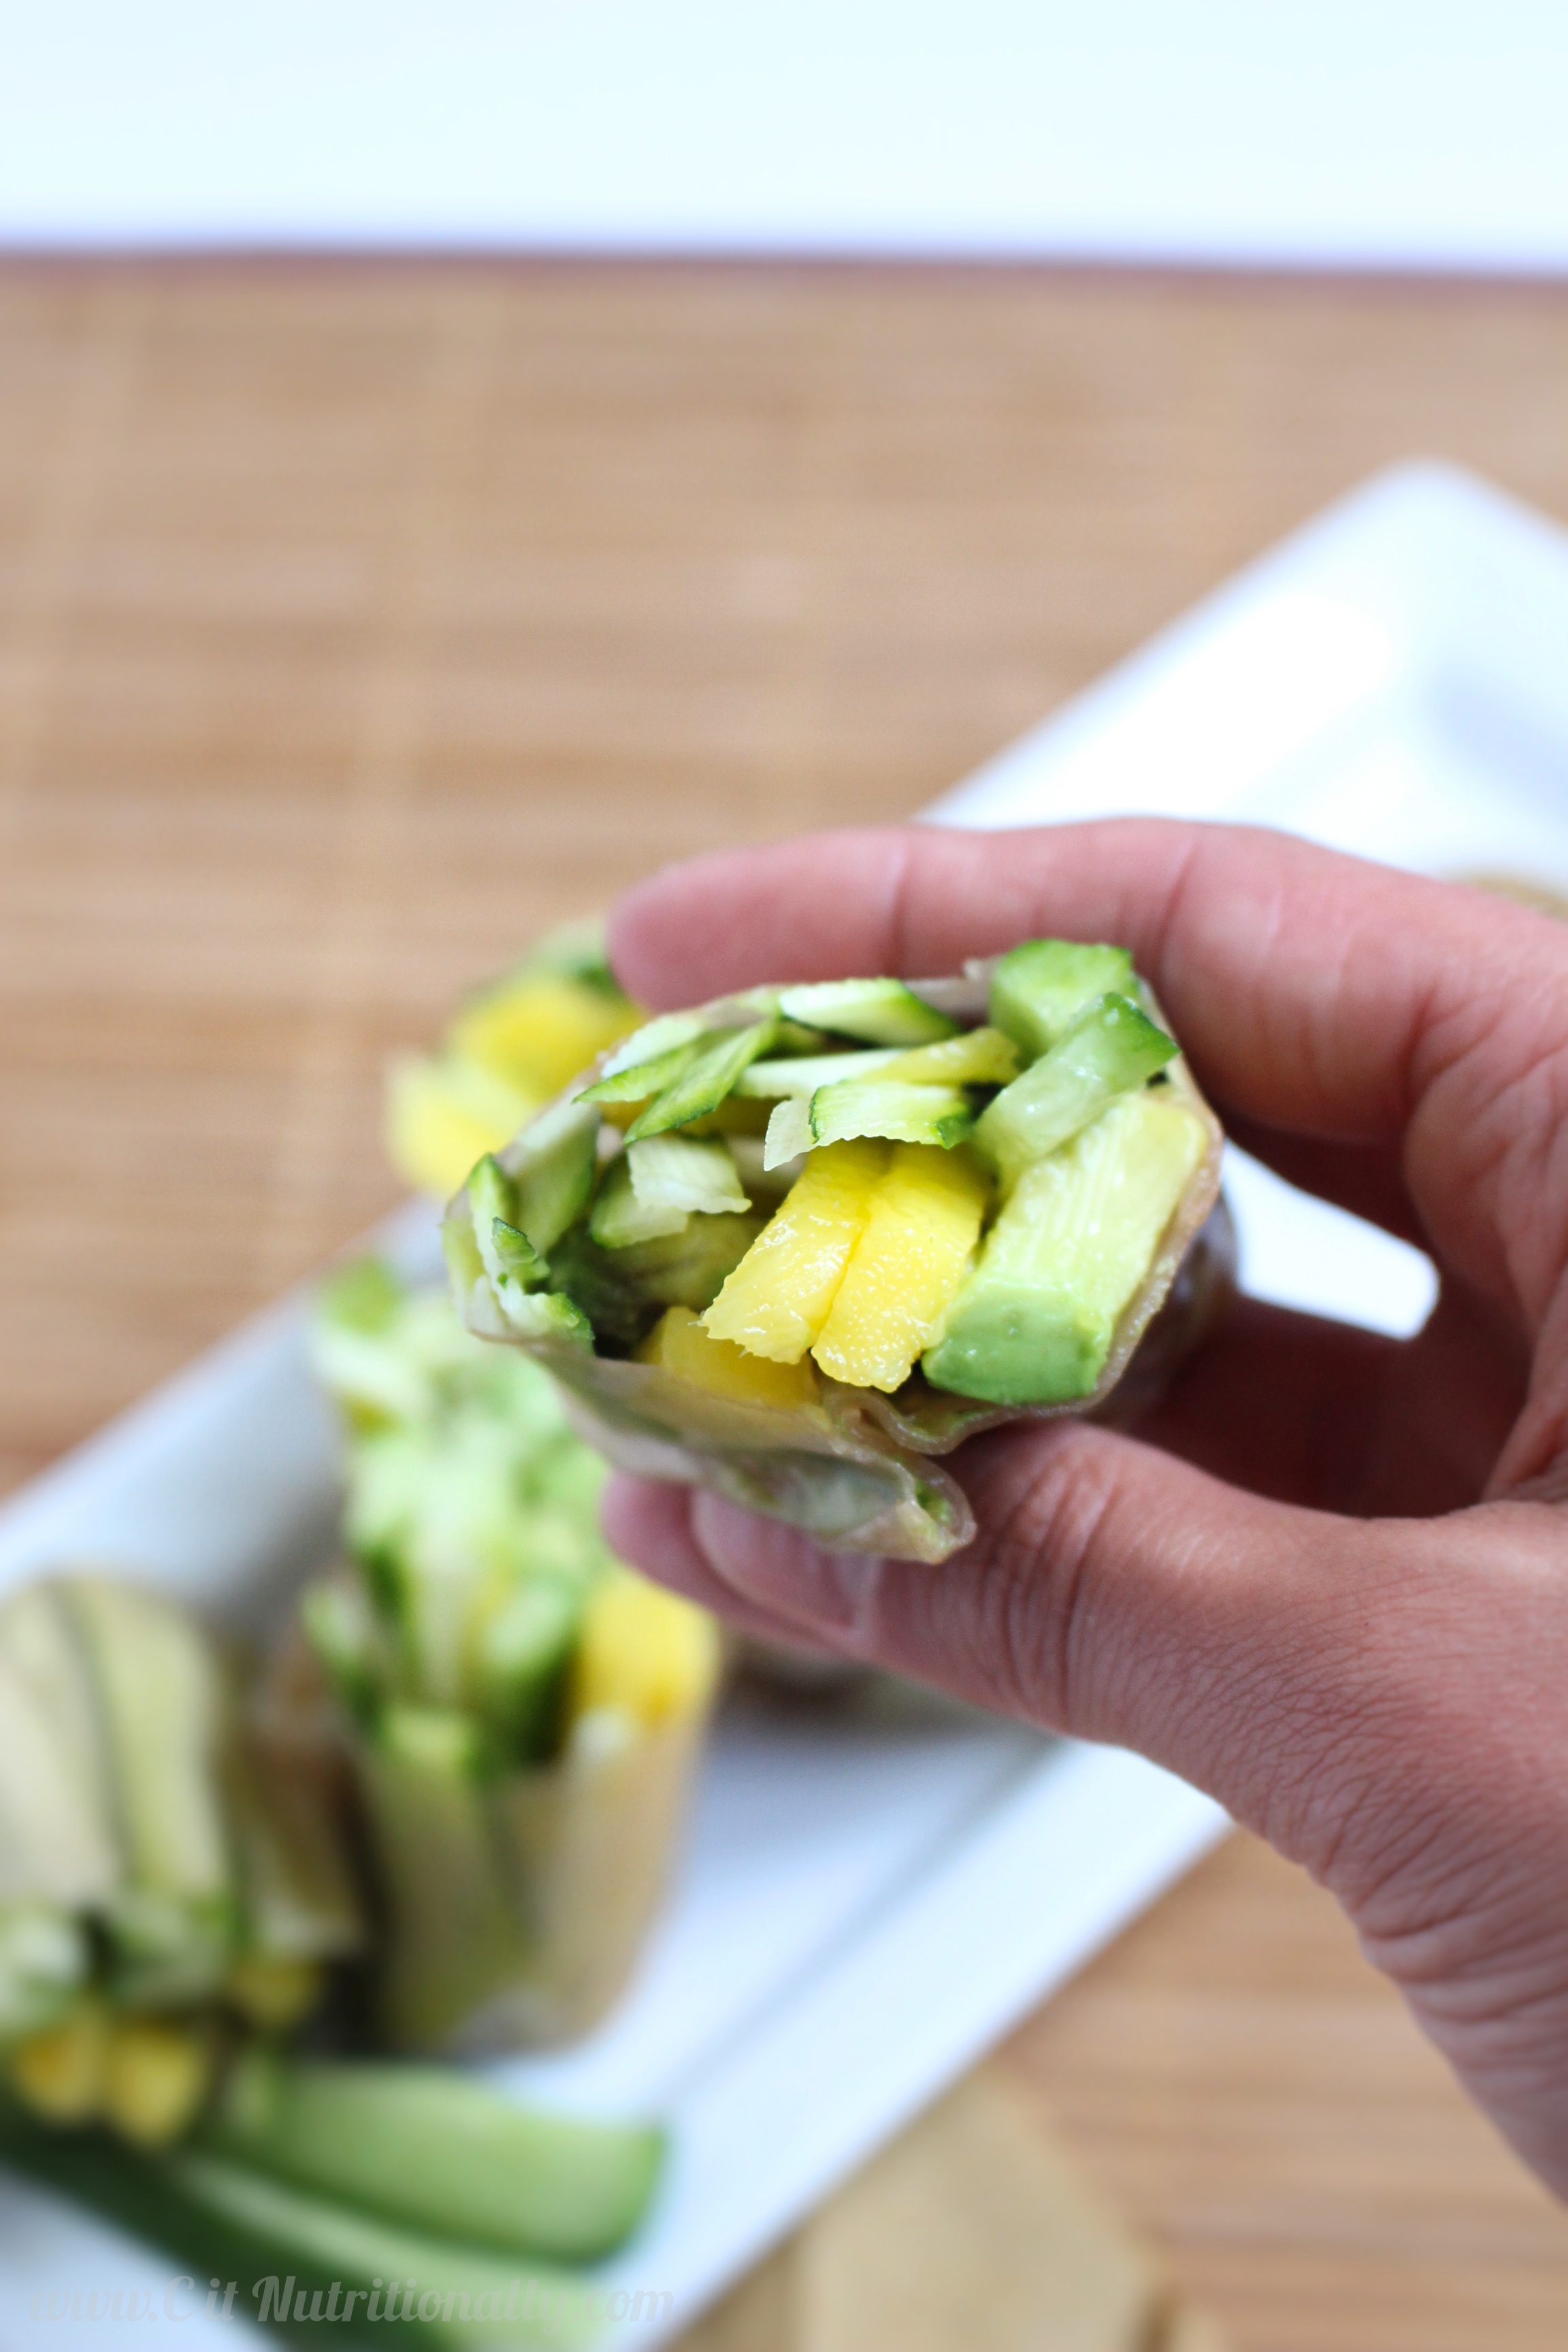 Mango, Cucumber & Zucchini Summer Rolls with Sunflower Seed Dipping Sauce | C it Nutritionally